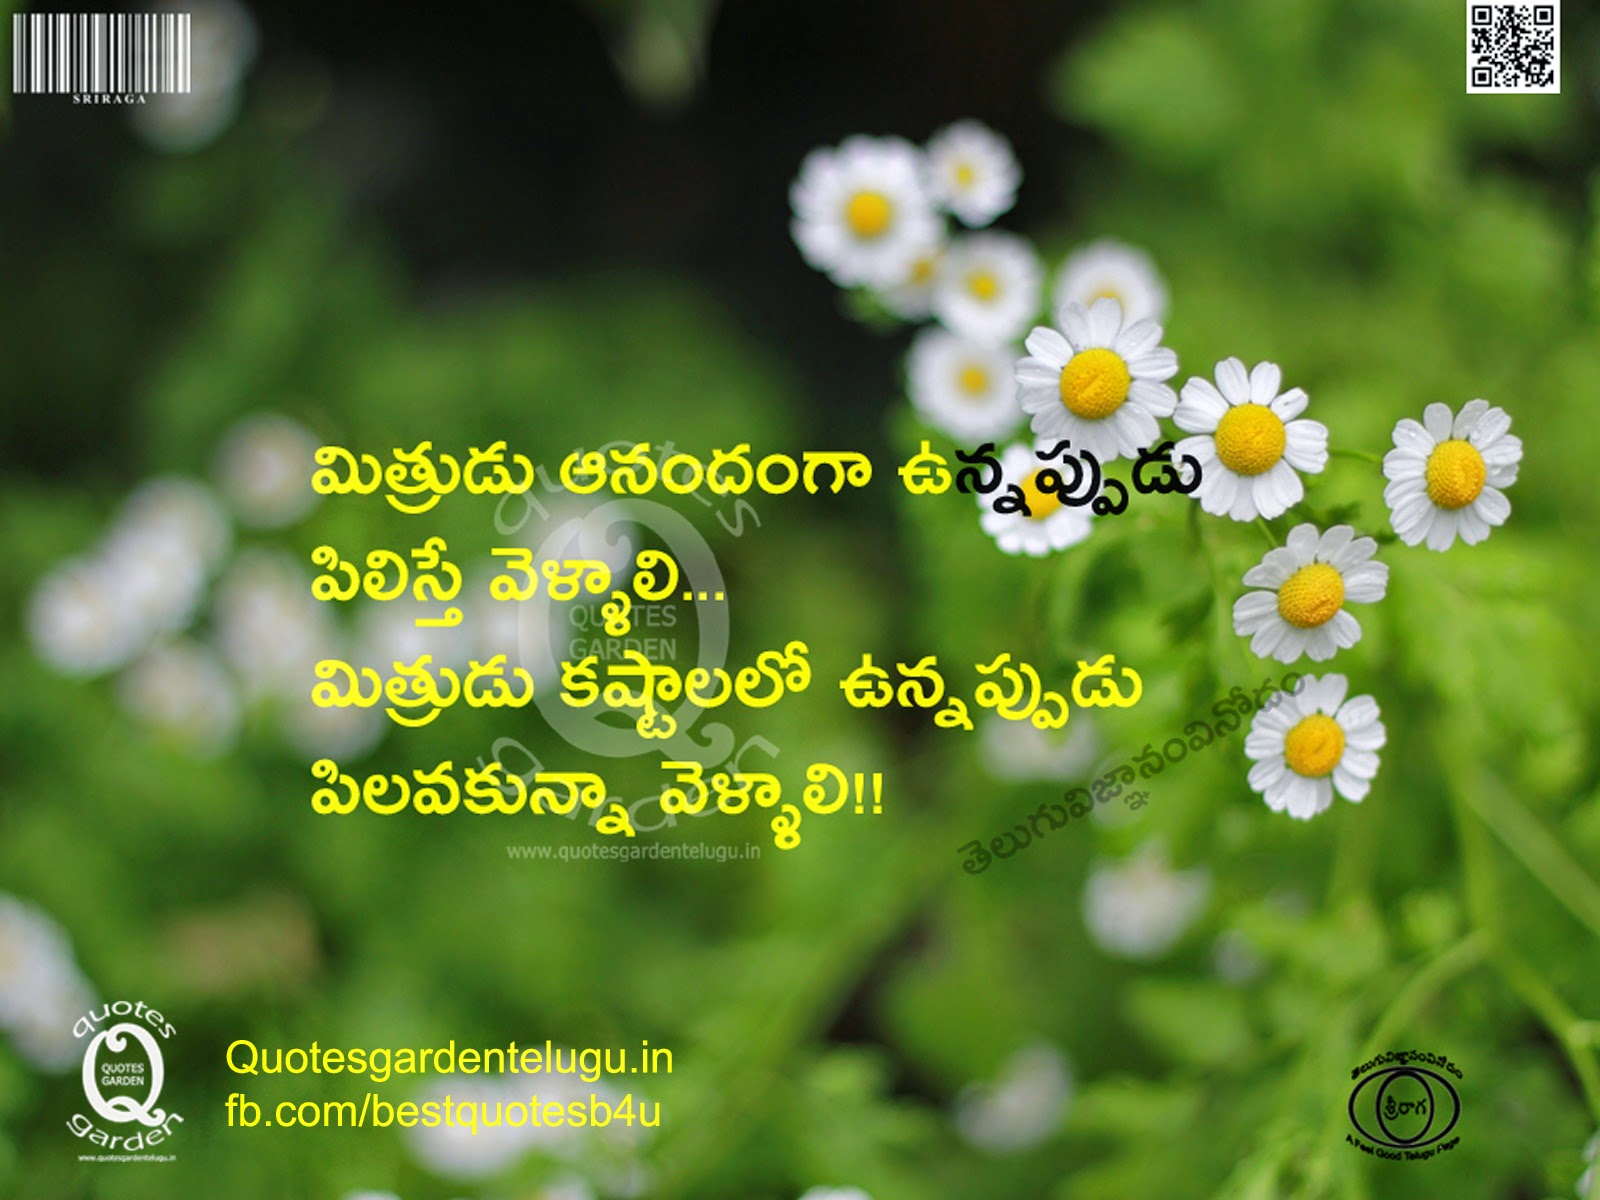 Best Telugu friendship quotes with nice wallpapers and beautiful images